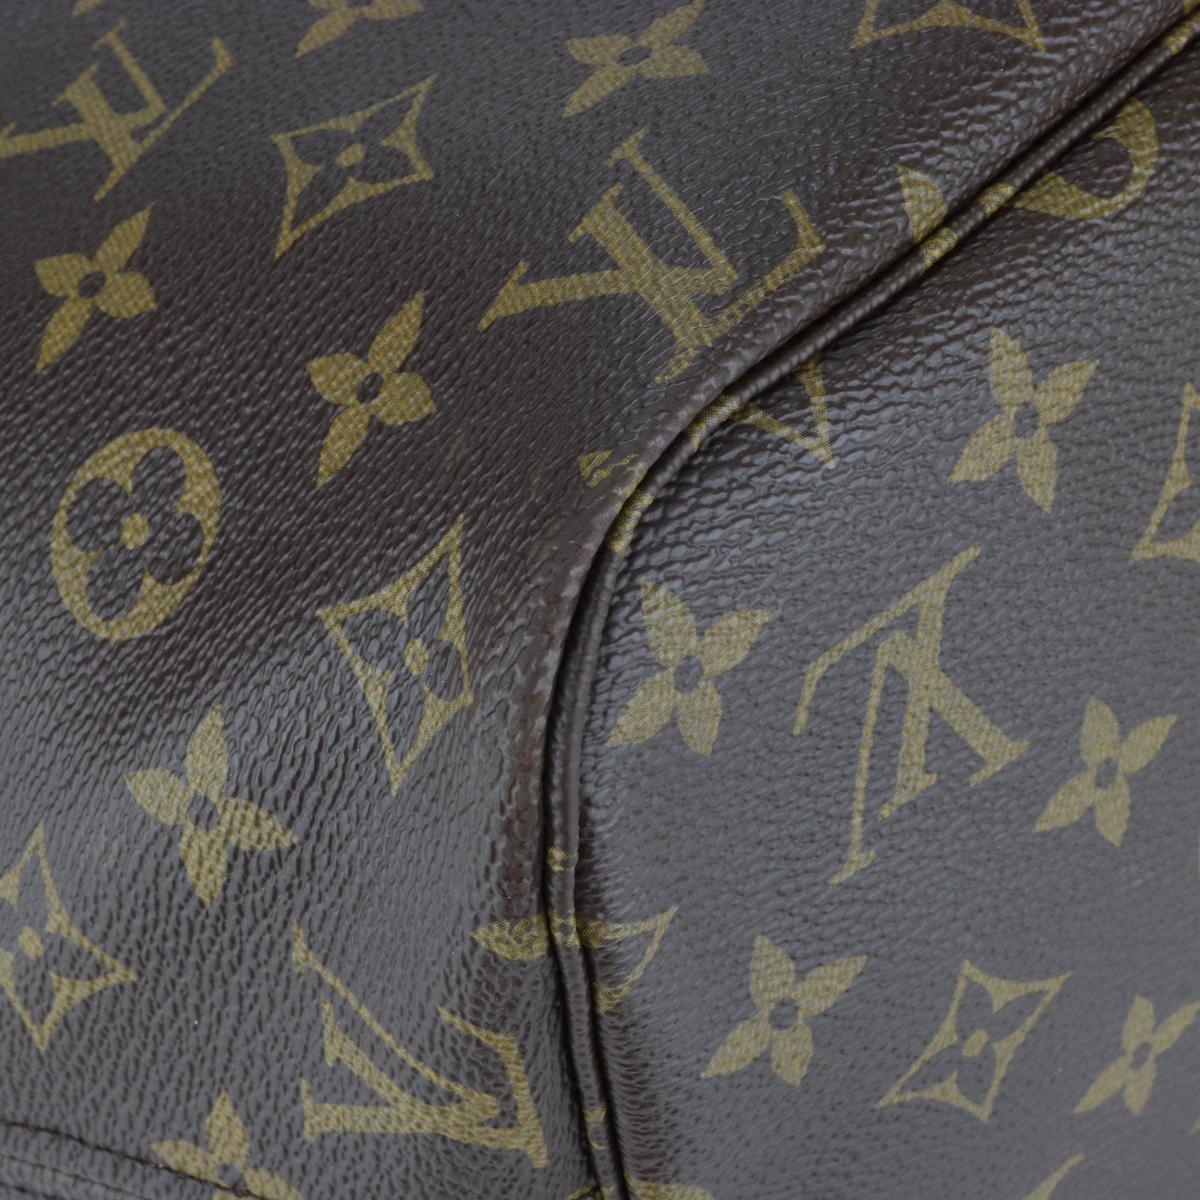 Louis Vuitton Neverfull MM Bag in Monogram with Beige Interior 2014 For Sale 3